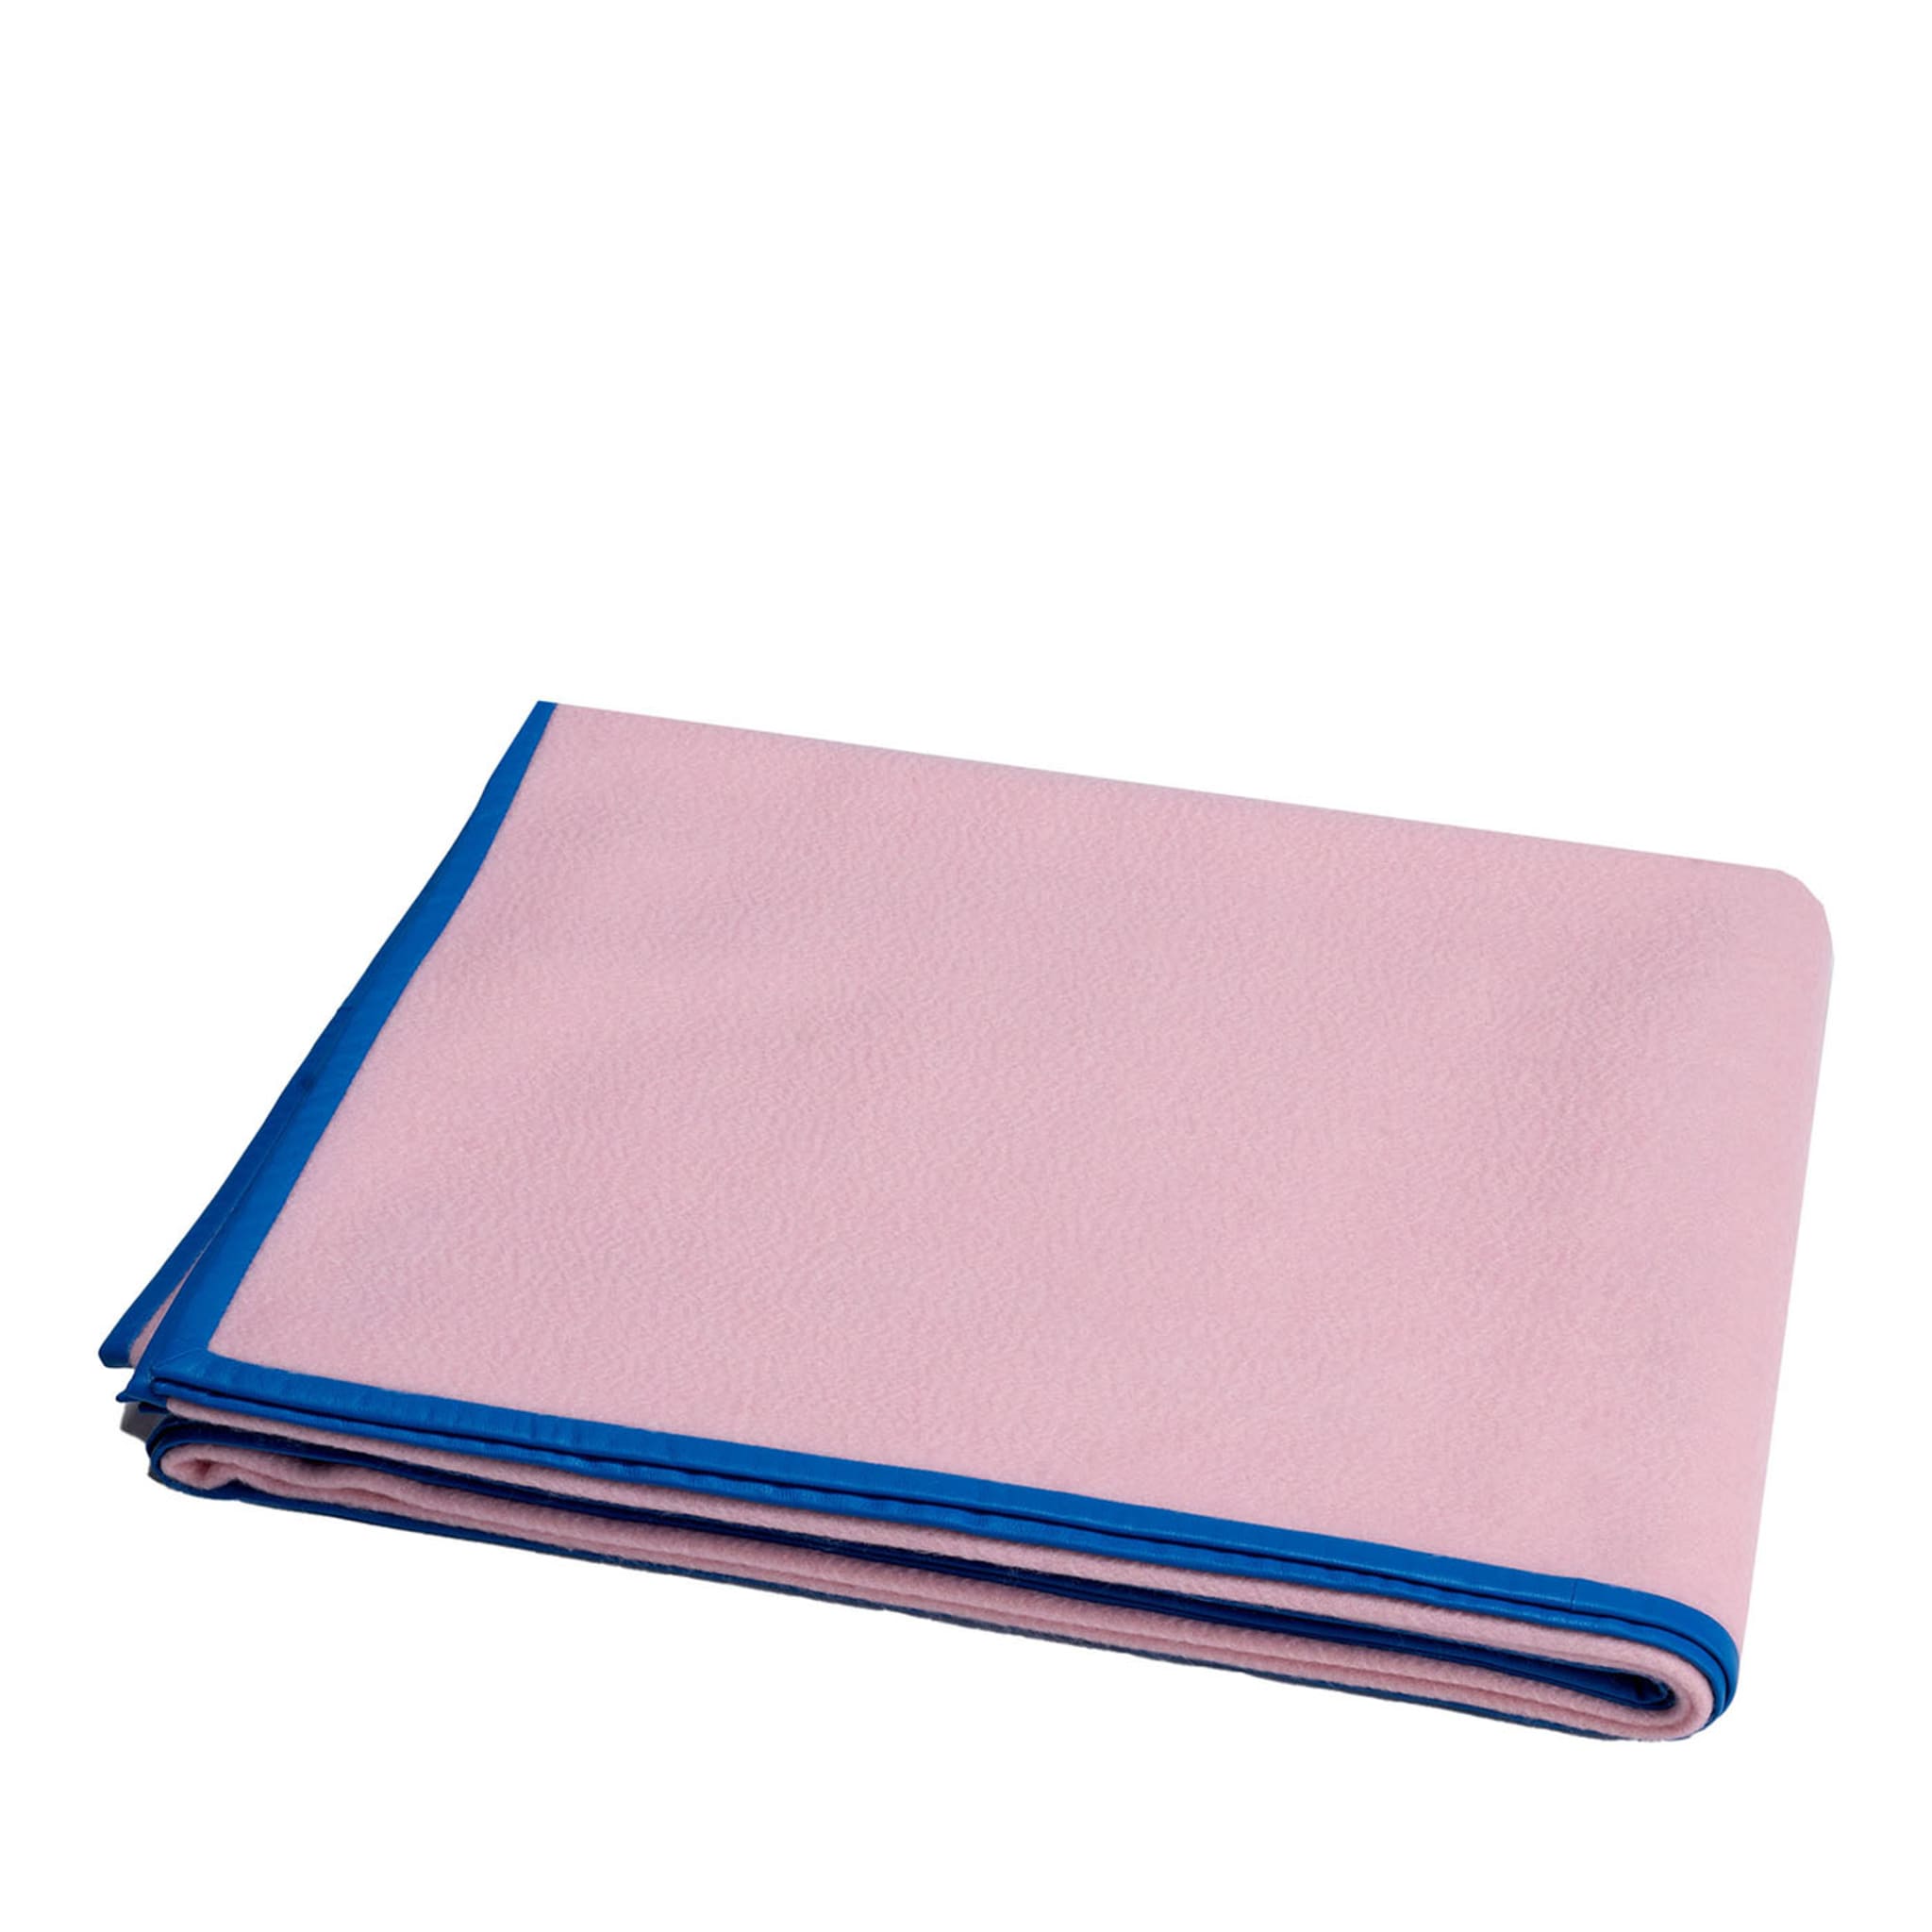 Biella Blue Leather and Pink Blanket - Main view